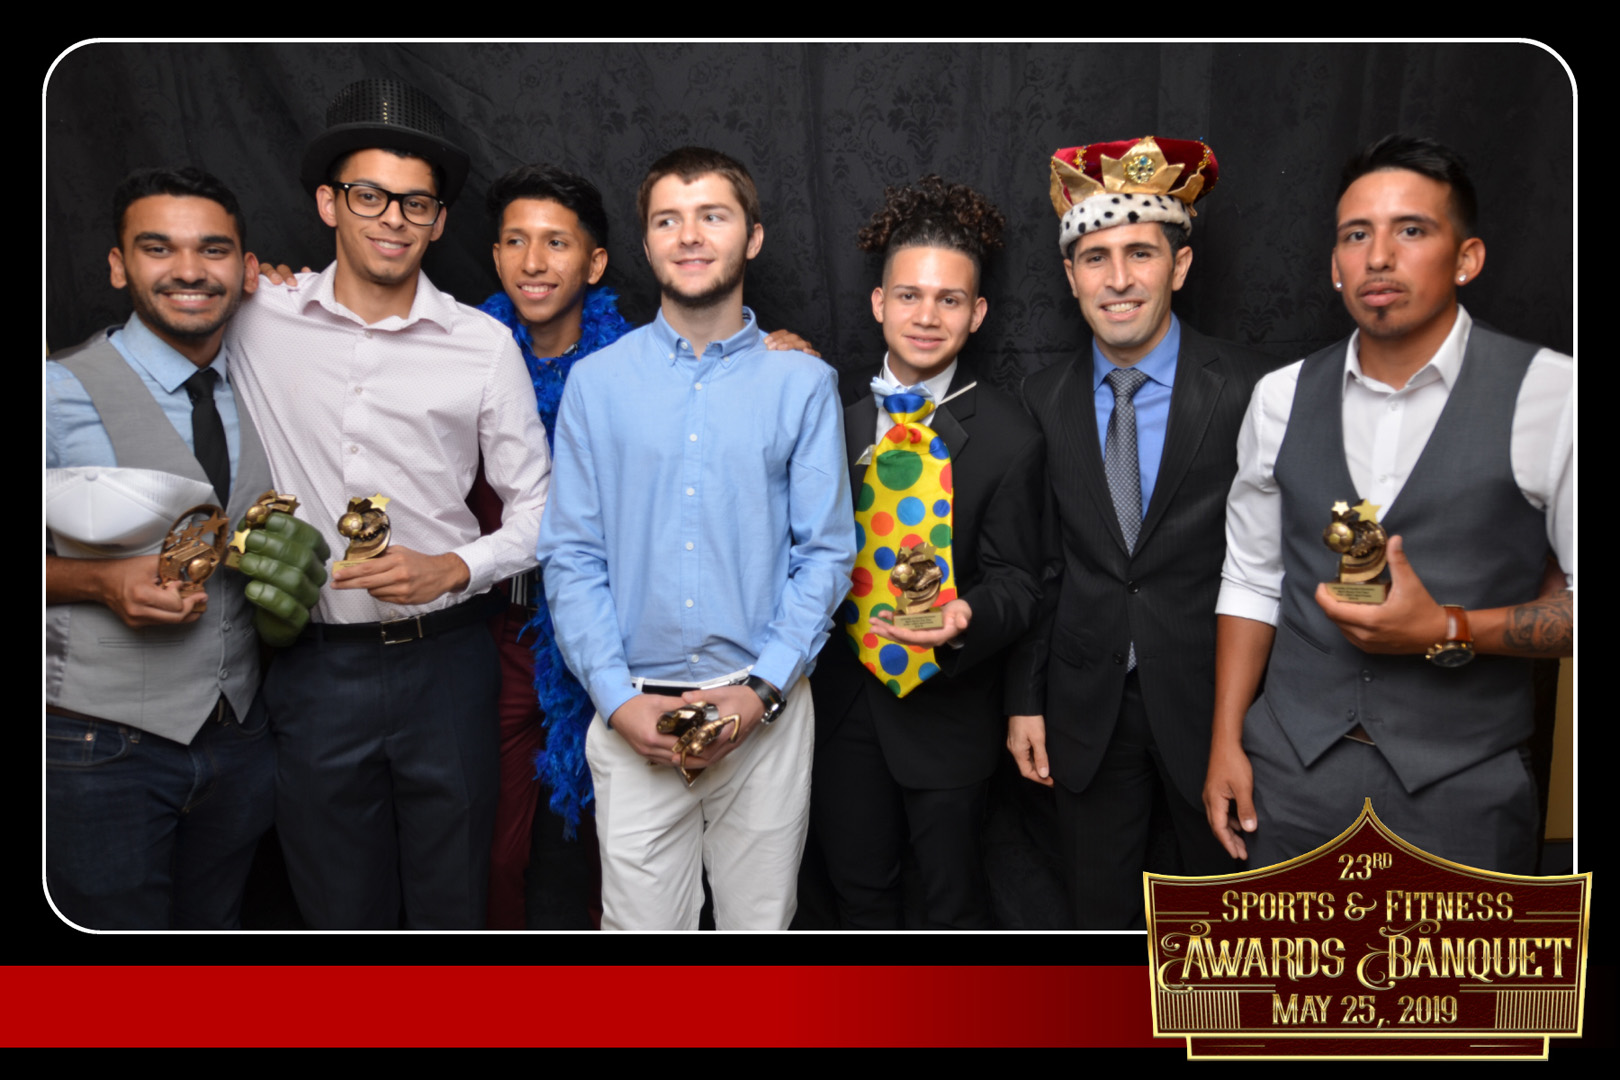 Group shot of students at the annual Sports and Fitness awards gala in 2019.